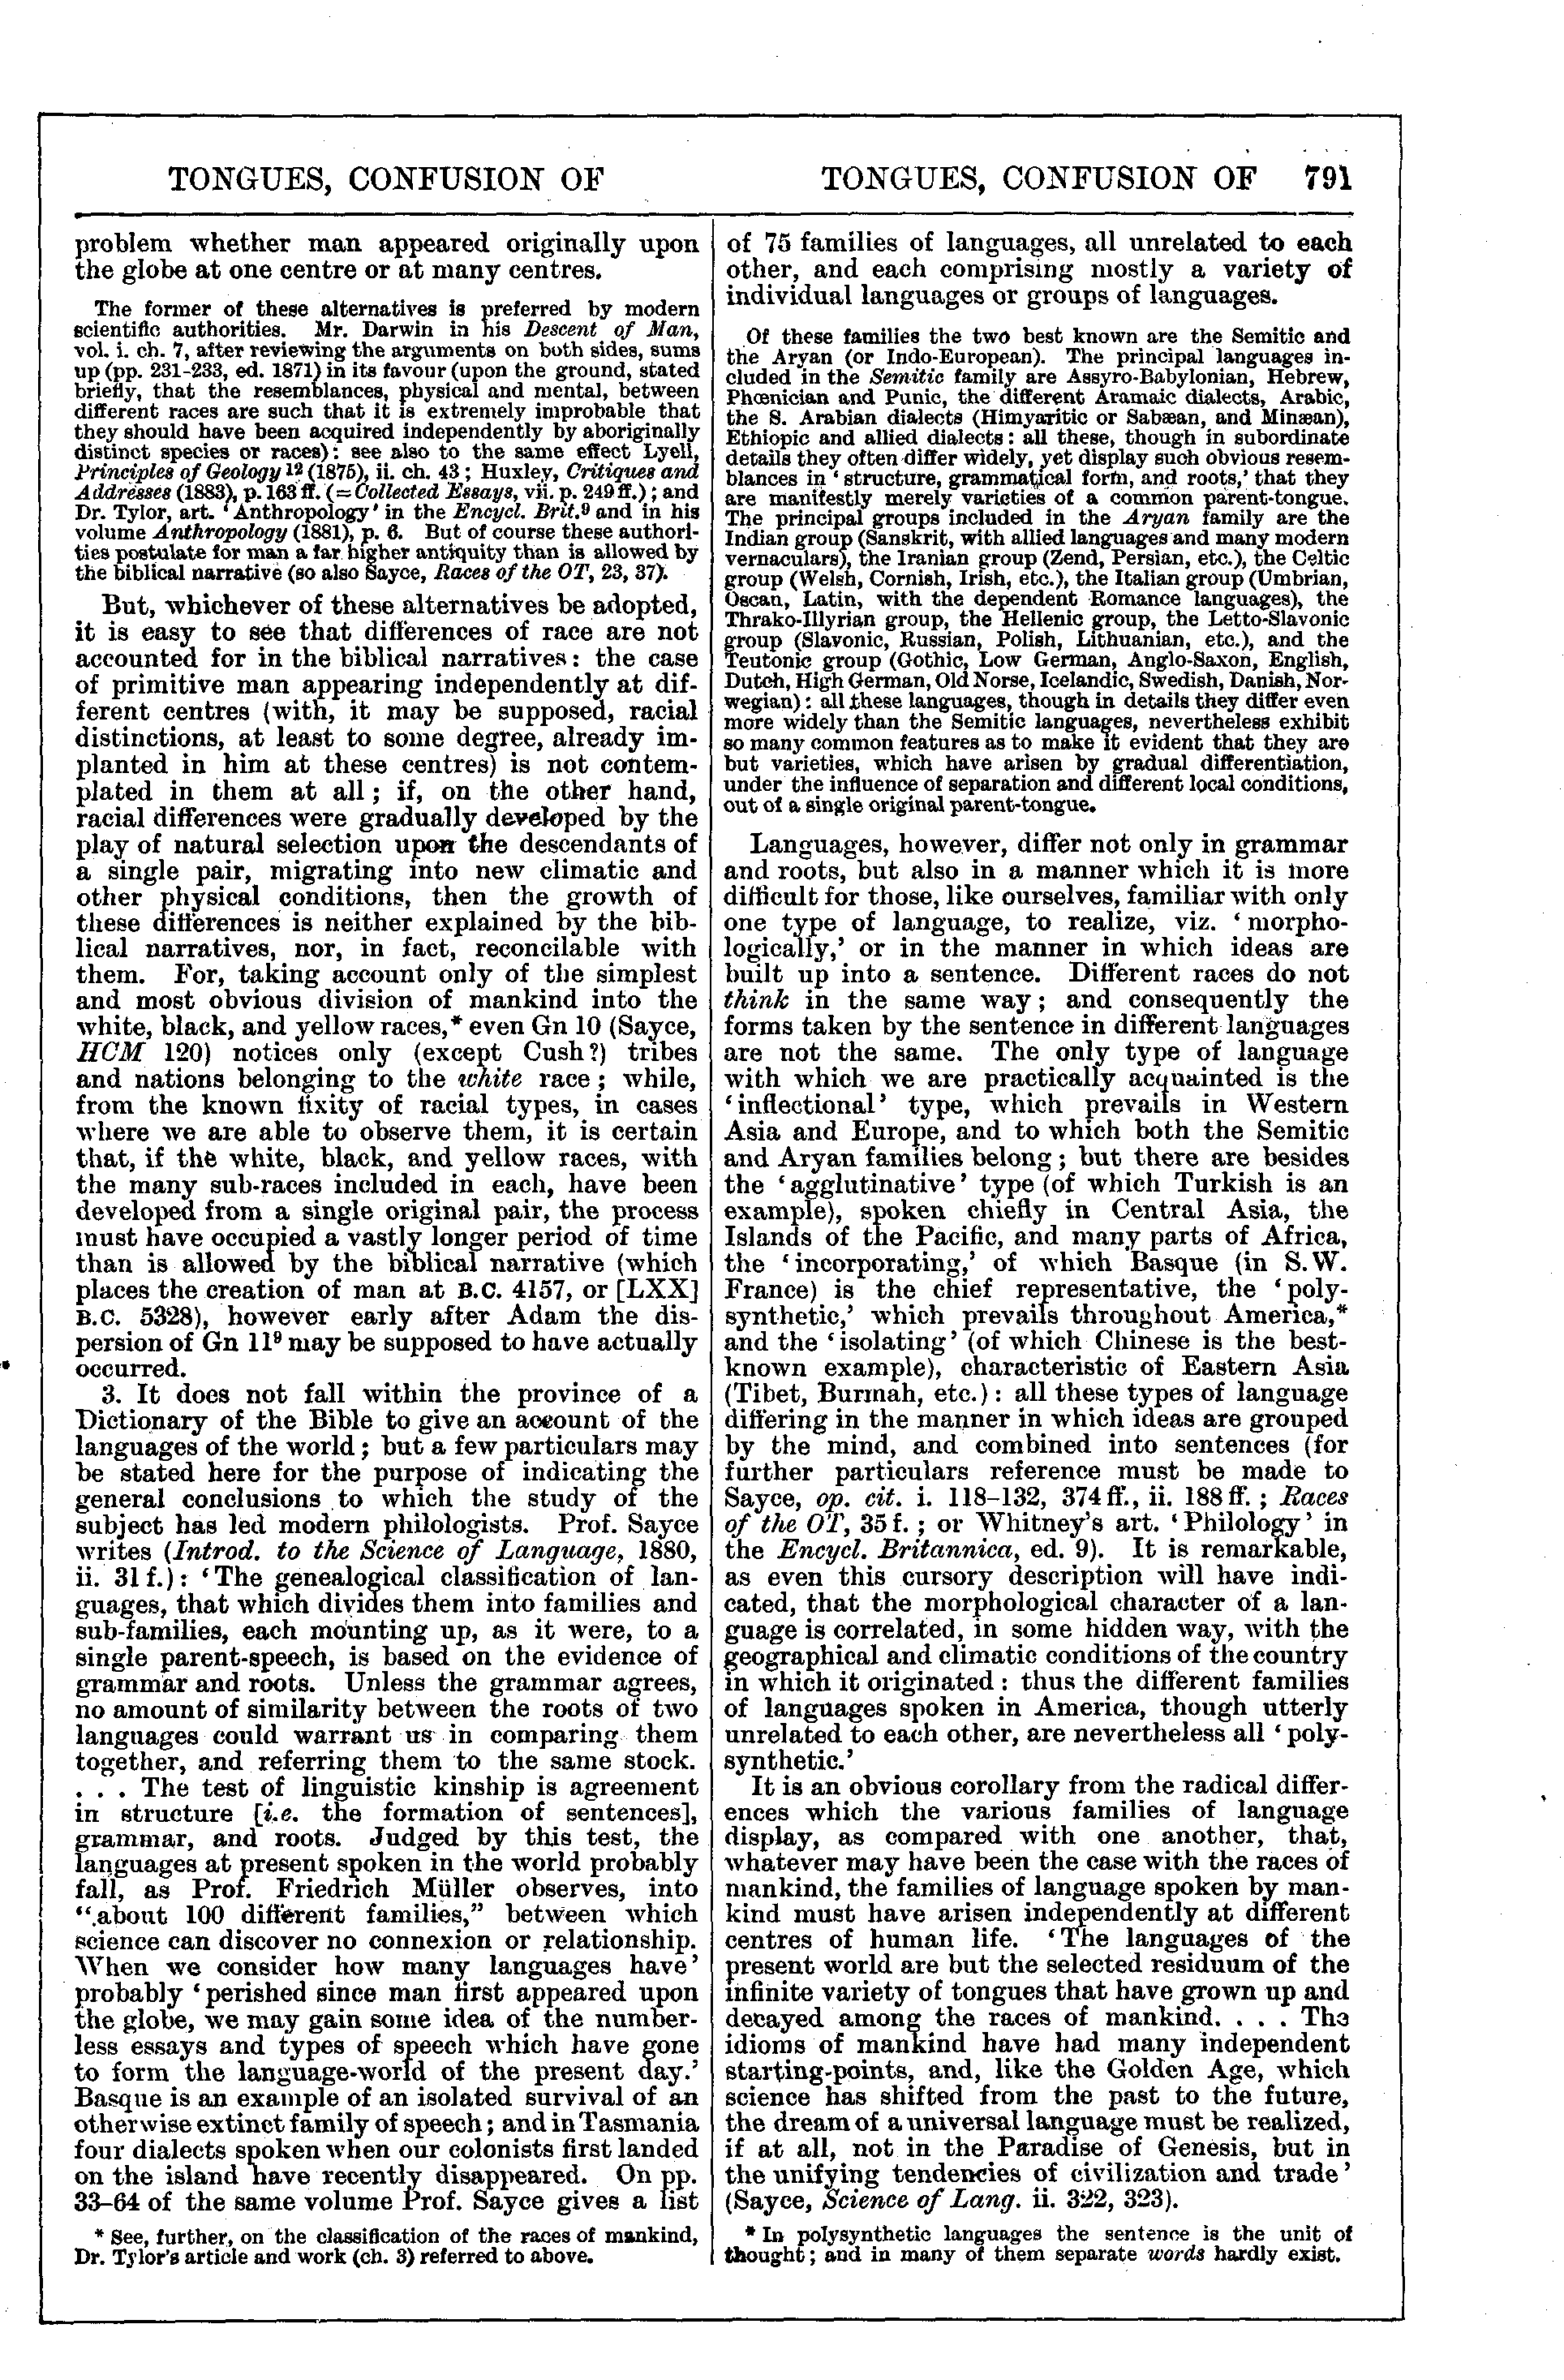 Image of page 791